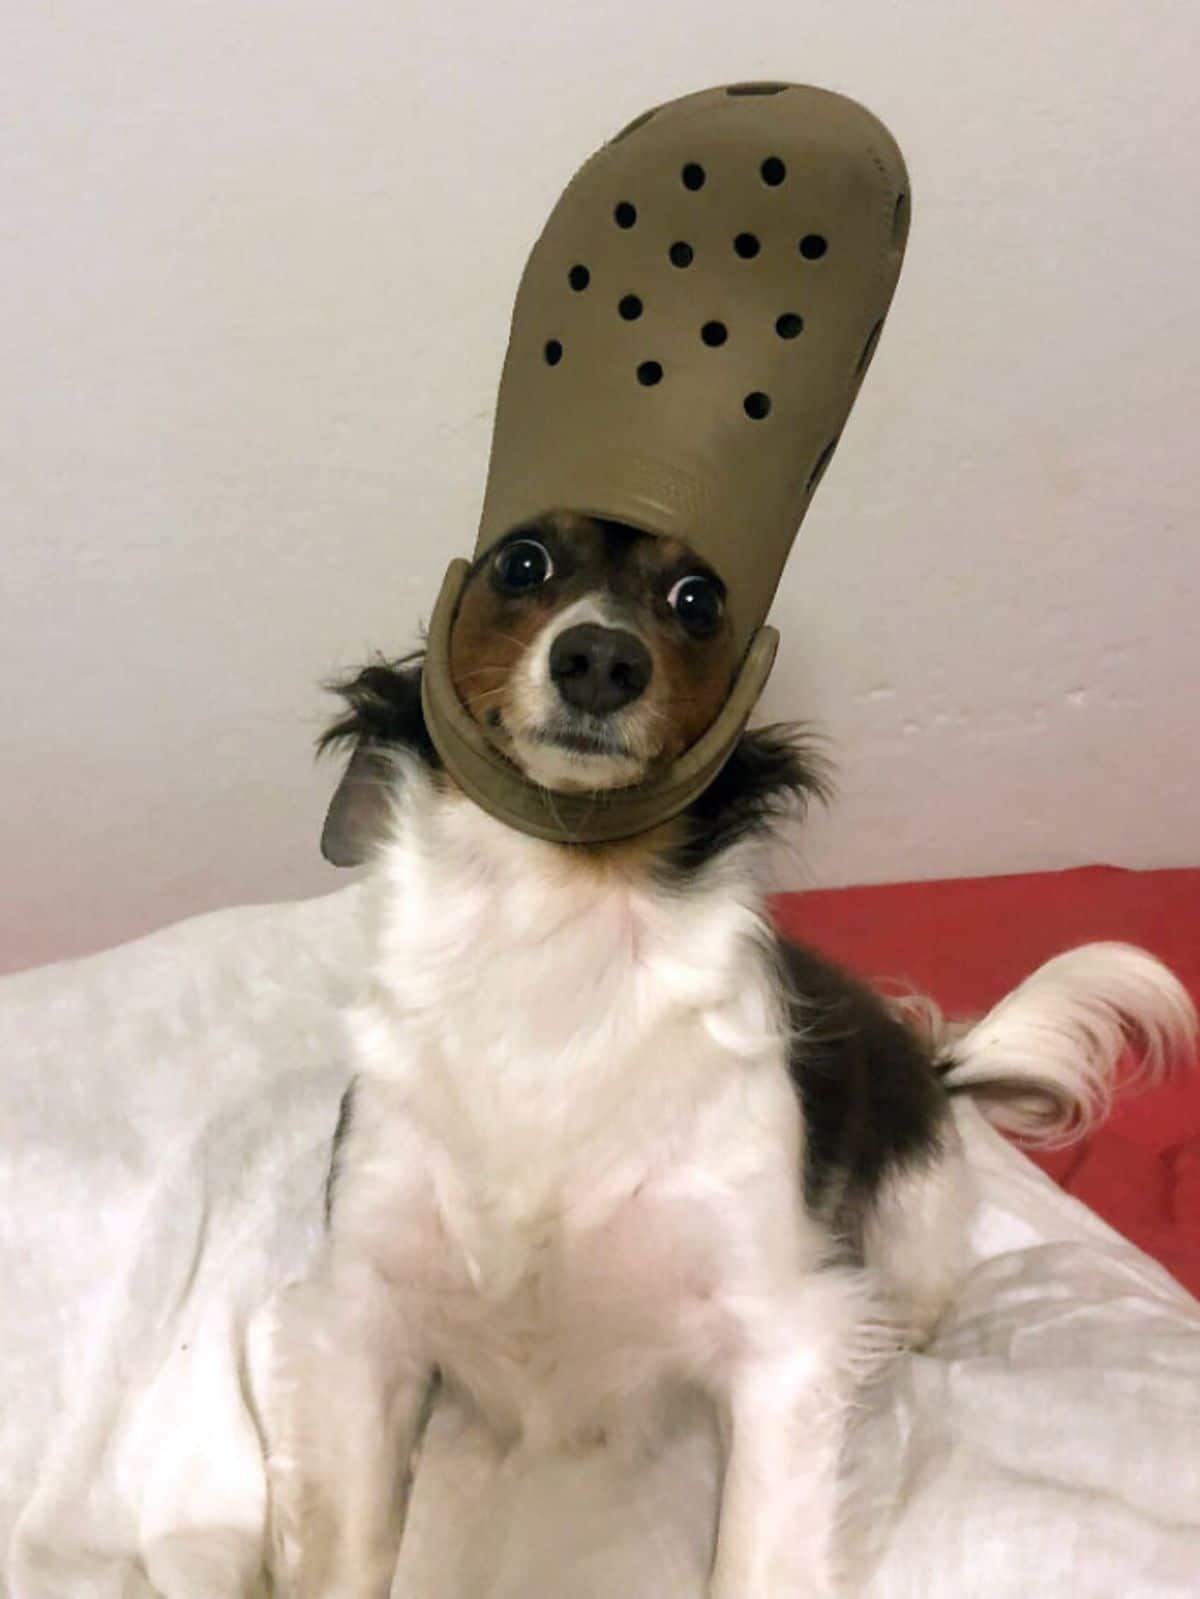 white black and brown dog looking surprised and wearing a khaki crocs slipper on the head